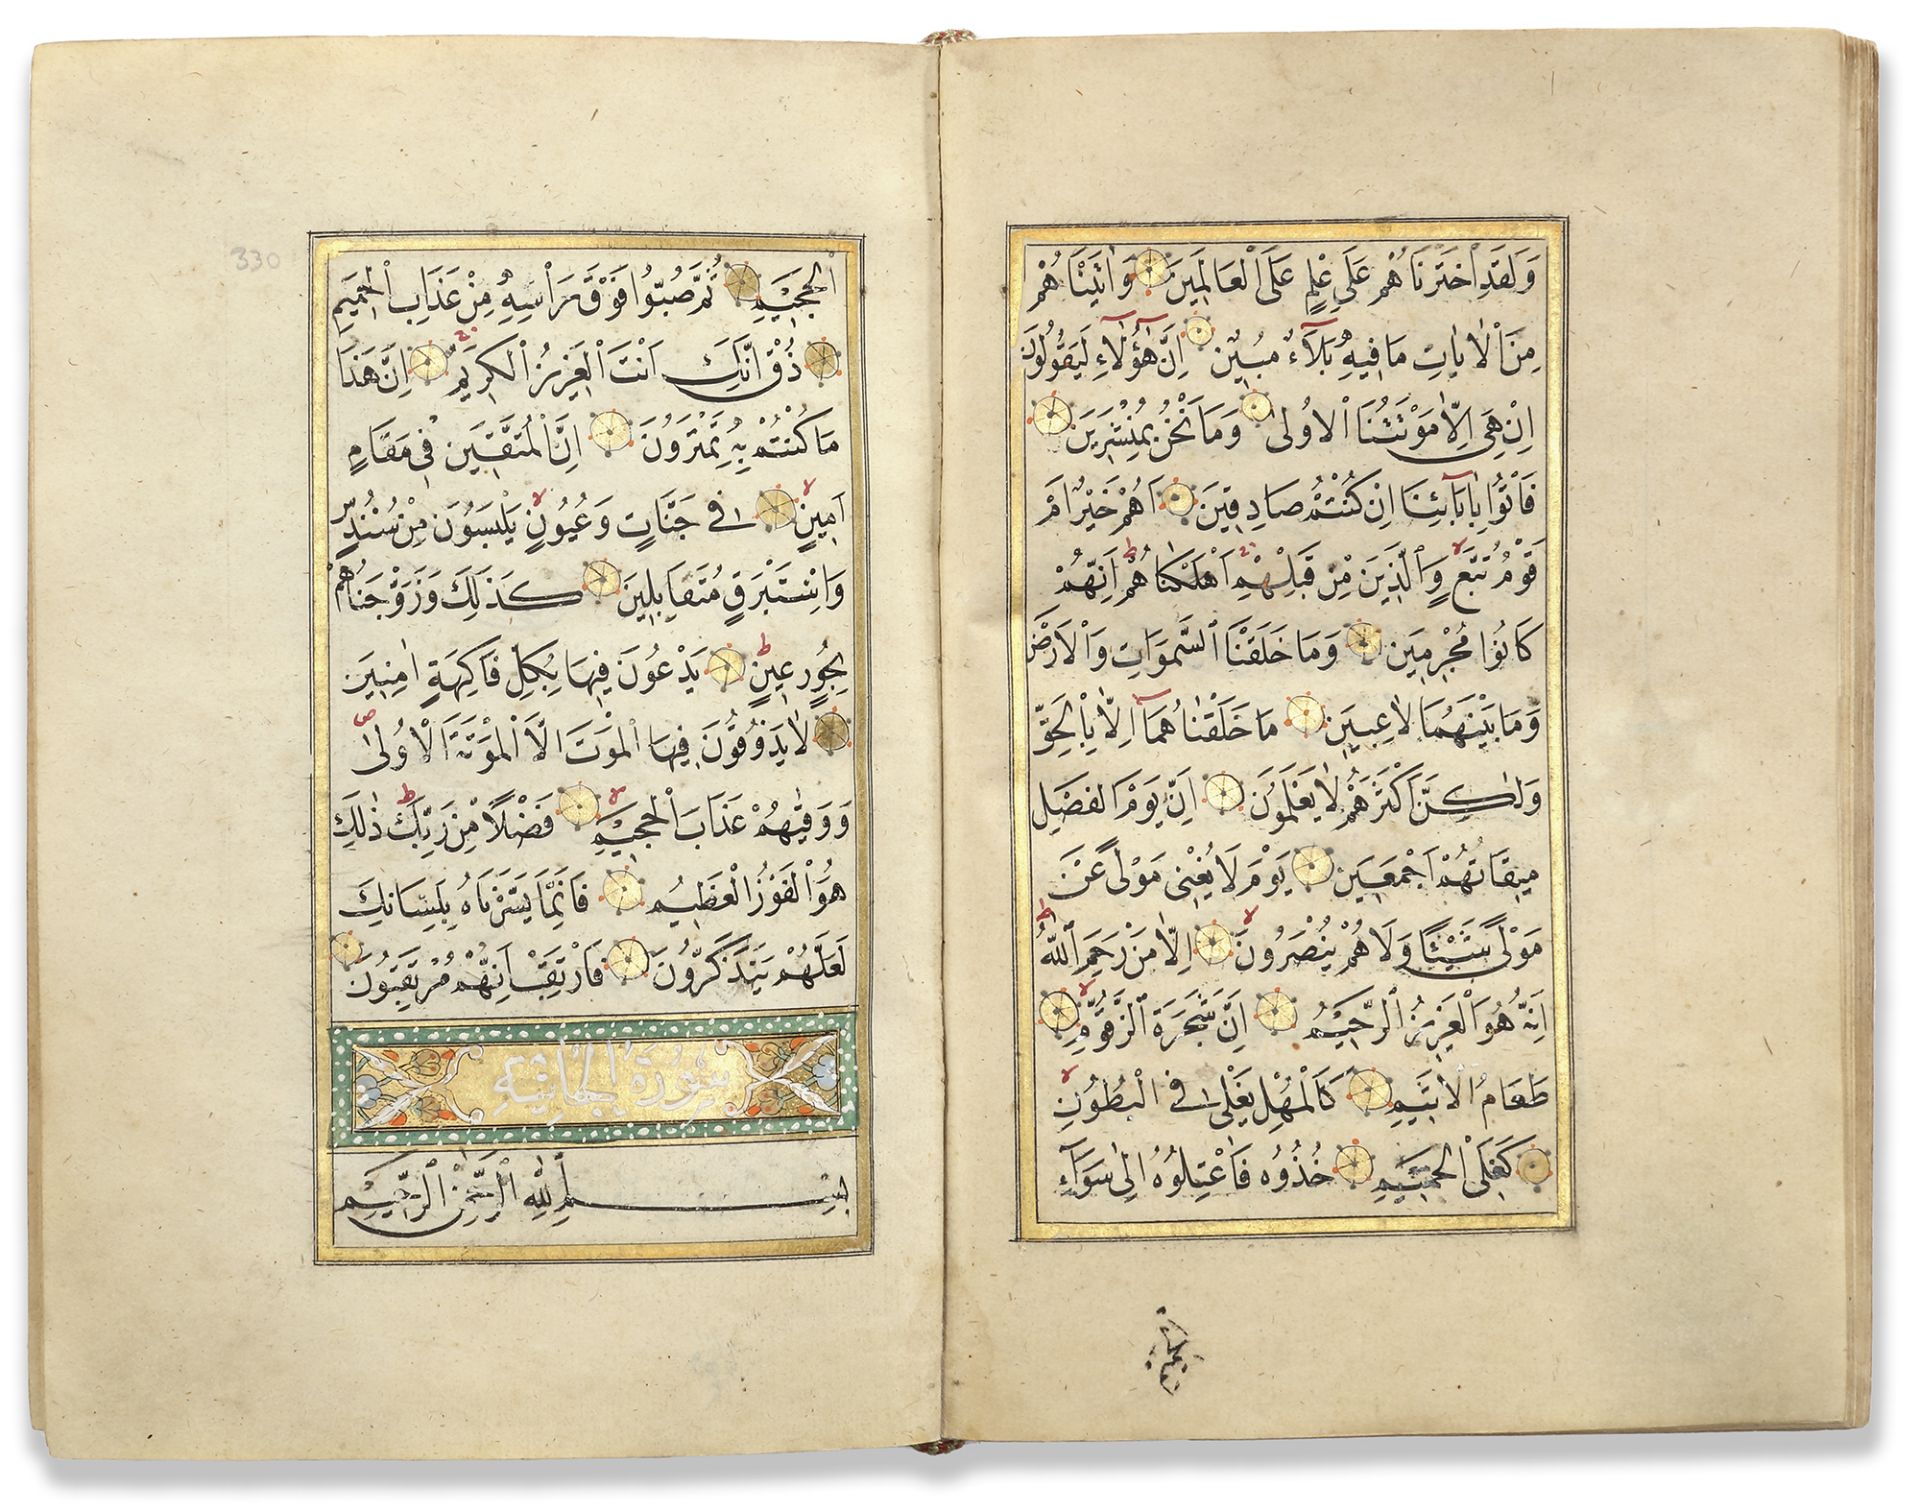 AN ILLUMINATED OTTOMAN QURAN SIGNED BY AHMED STUDENT OF HAFIZ OSMAN, 18TH CENTURY - Image 3 of 7